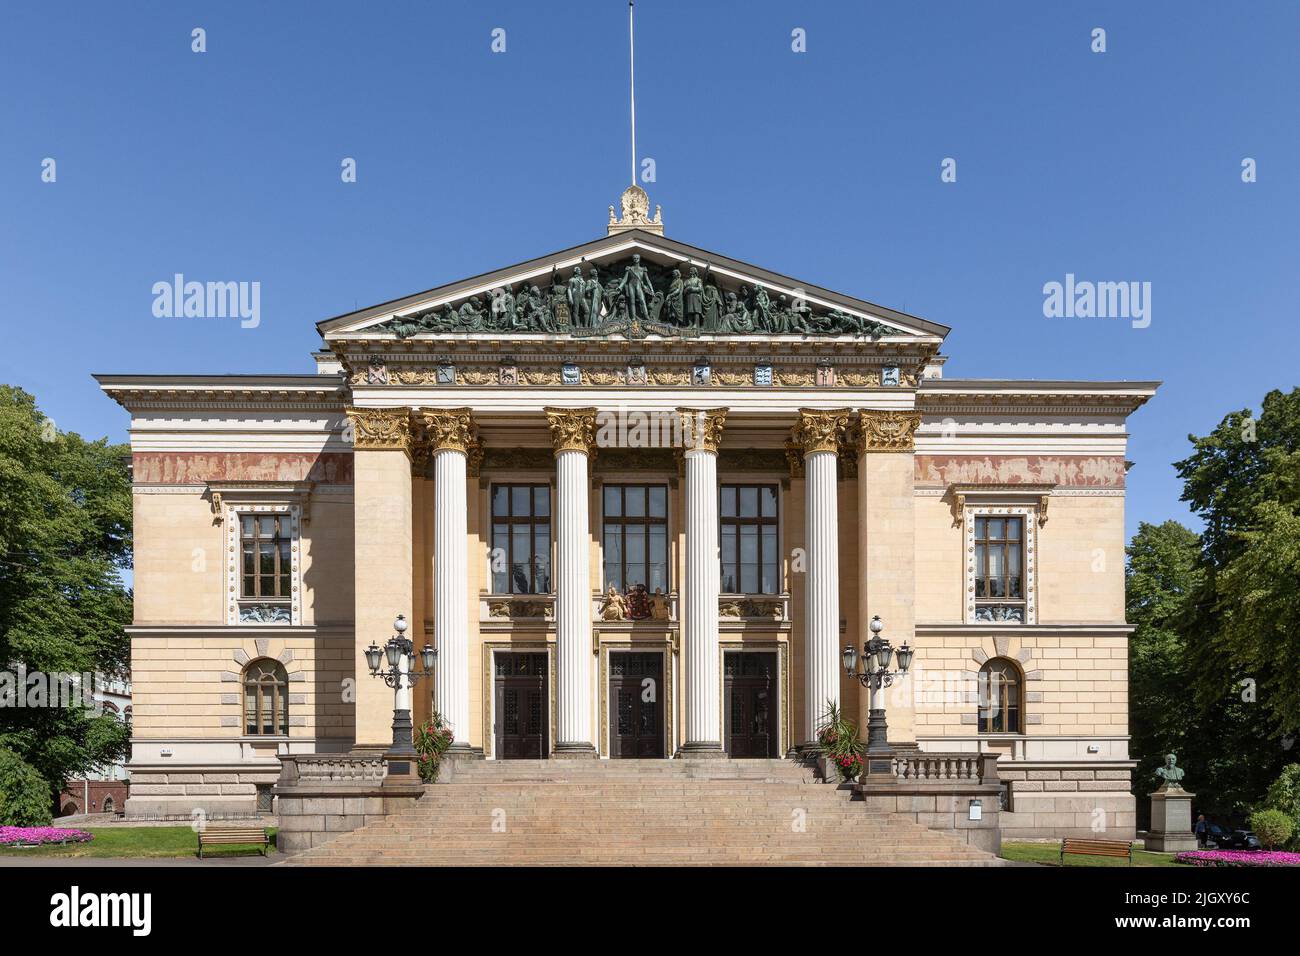 The House of the Estates in Helsinki is a prominent historic venue for important state events in Finland. Stock Photo